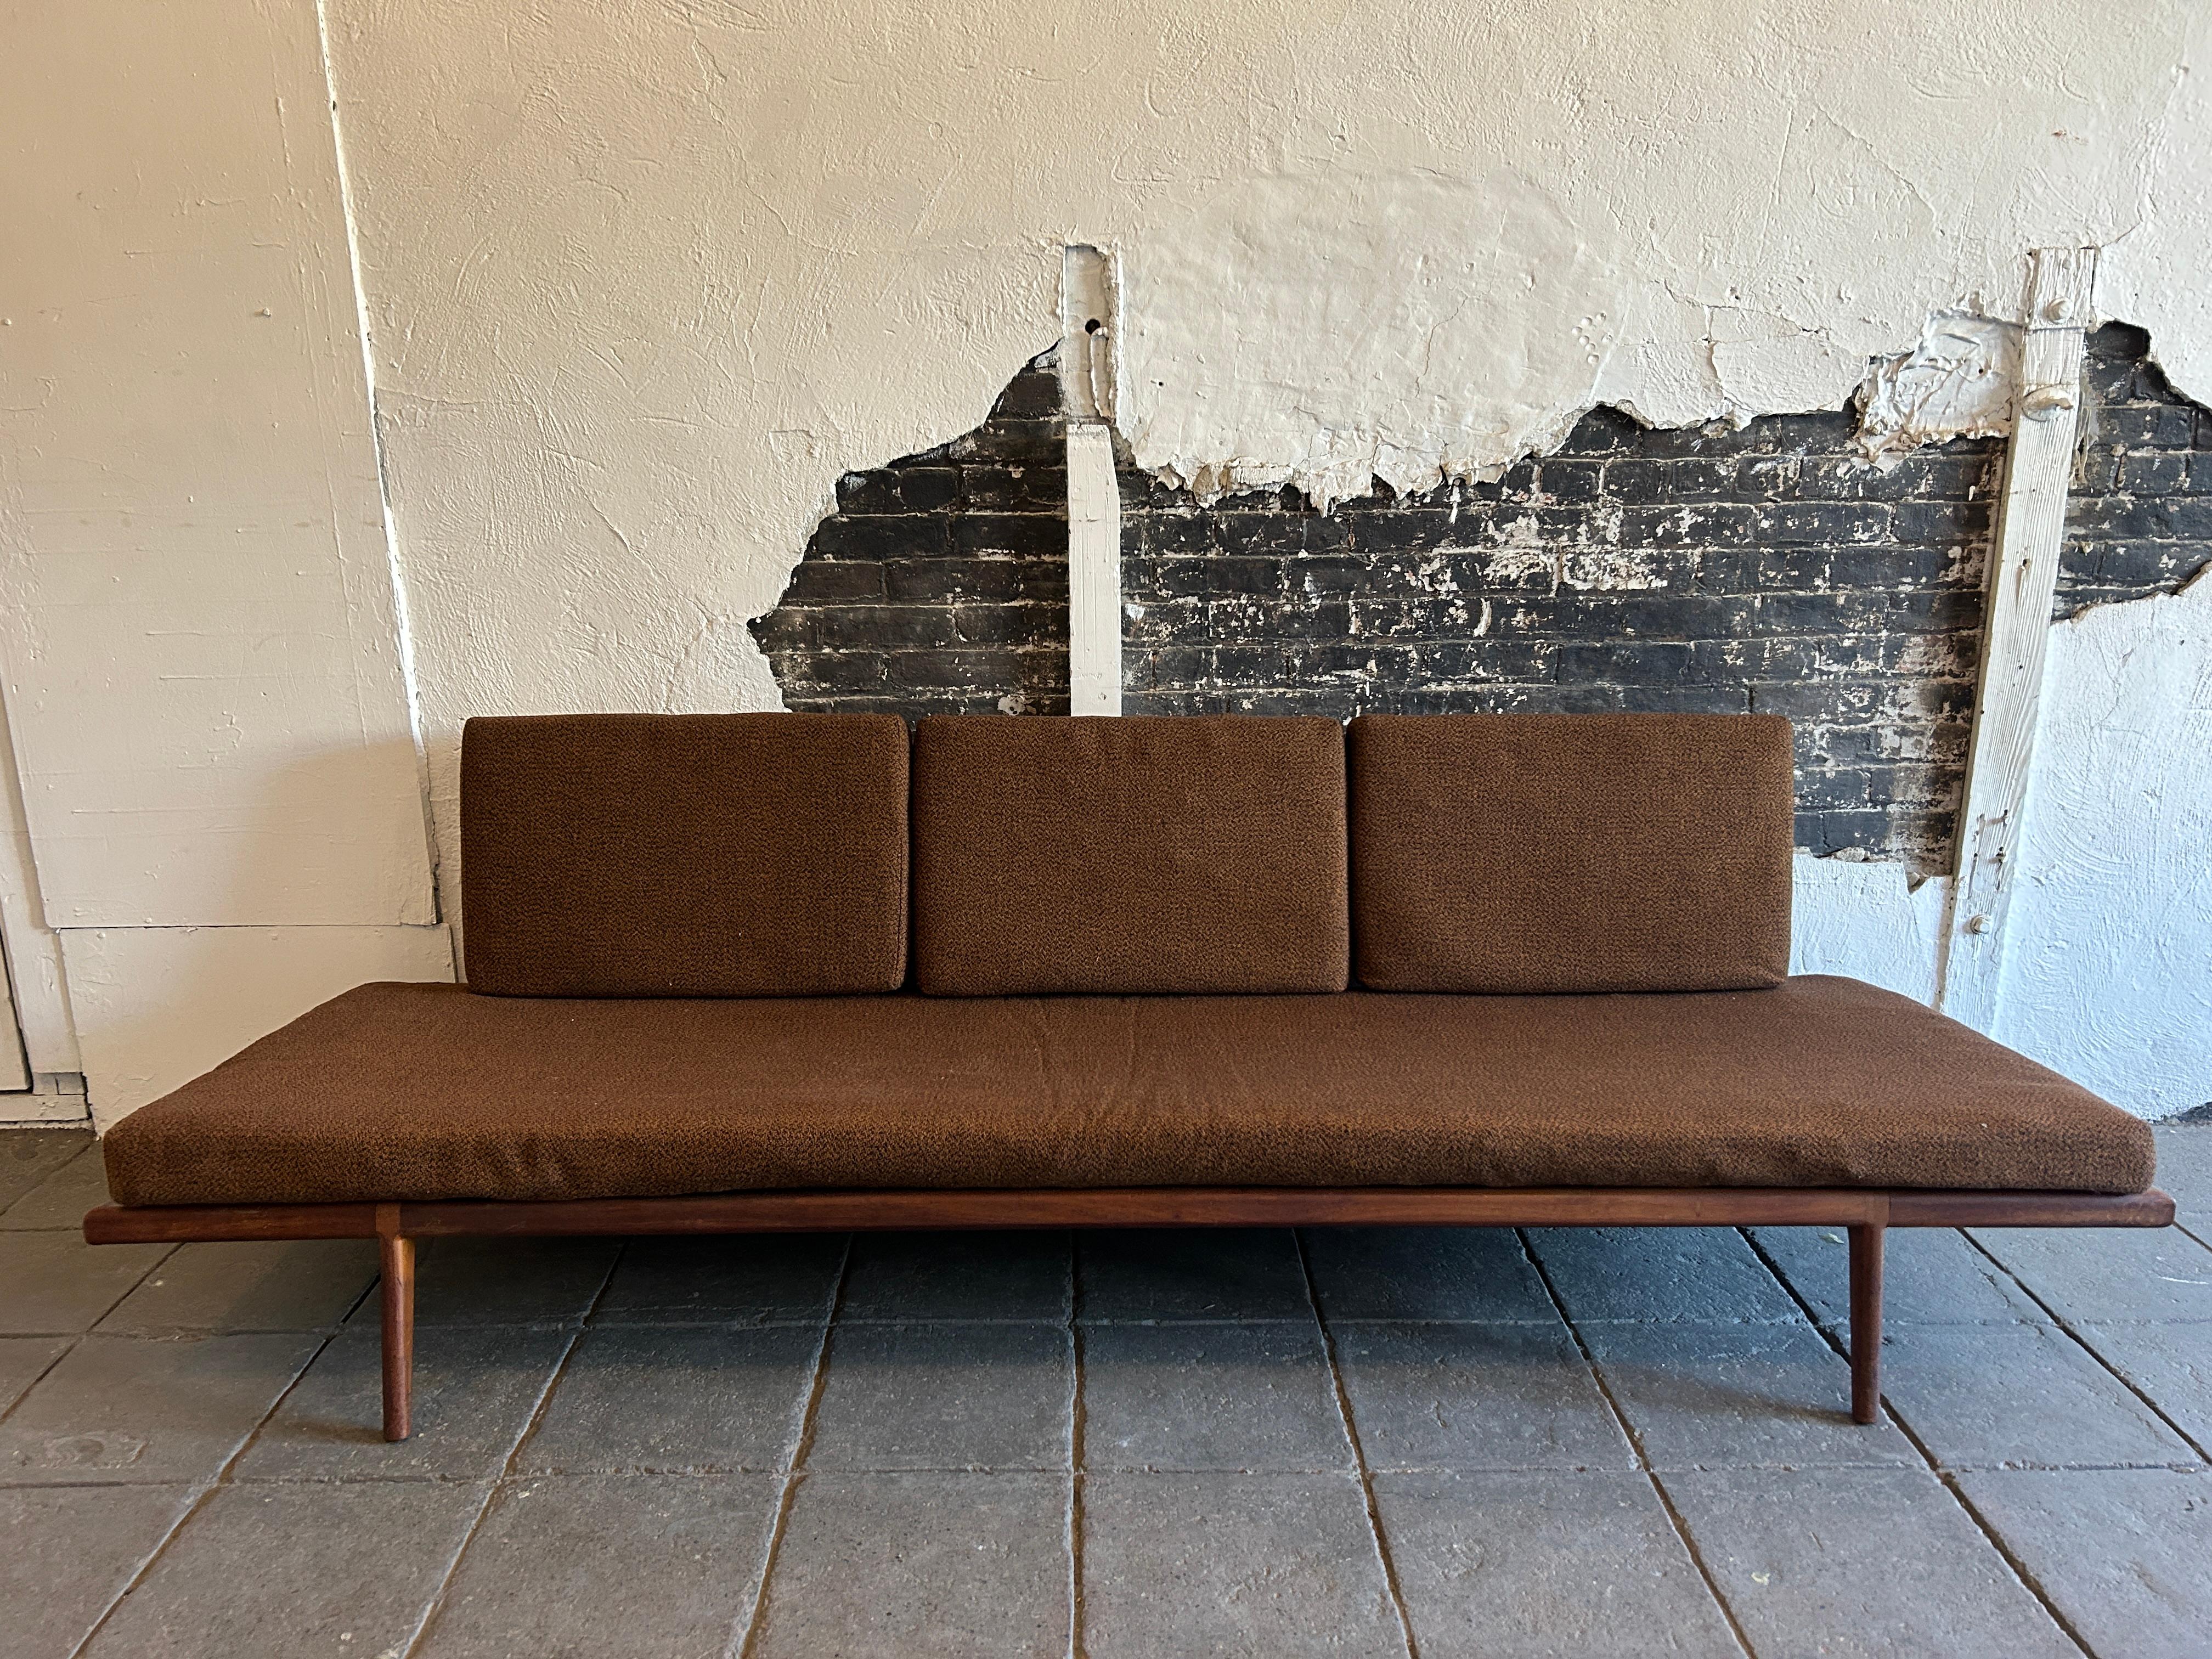 Stunning midcentury American Modern Mel Smilow Walnut frame long low sofa or daybed. Beautiful armless sofa with solid walnut sculpted frame and steel spring support insert. Has Original upholstery and foam would recommend new upholstery or use as